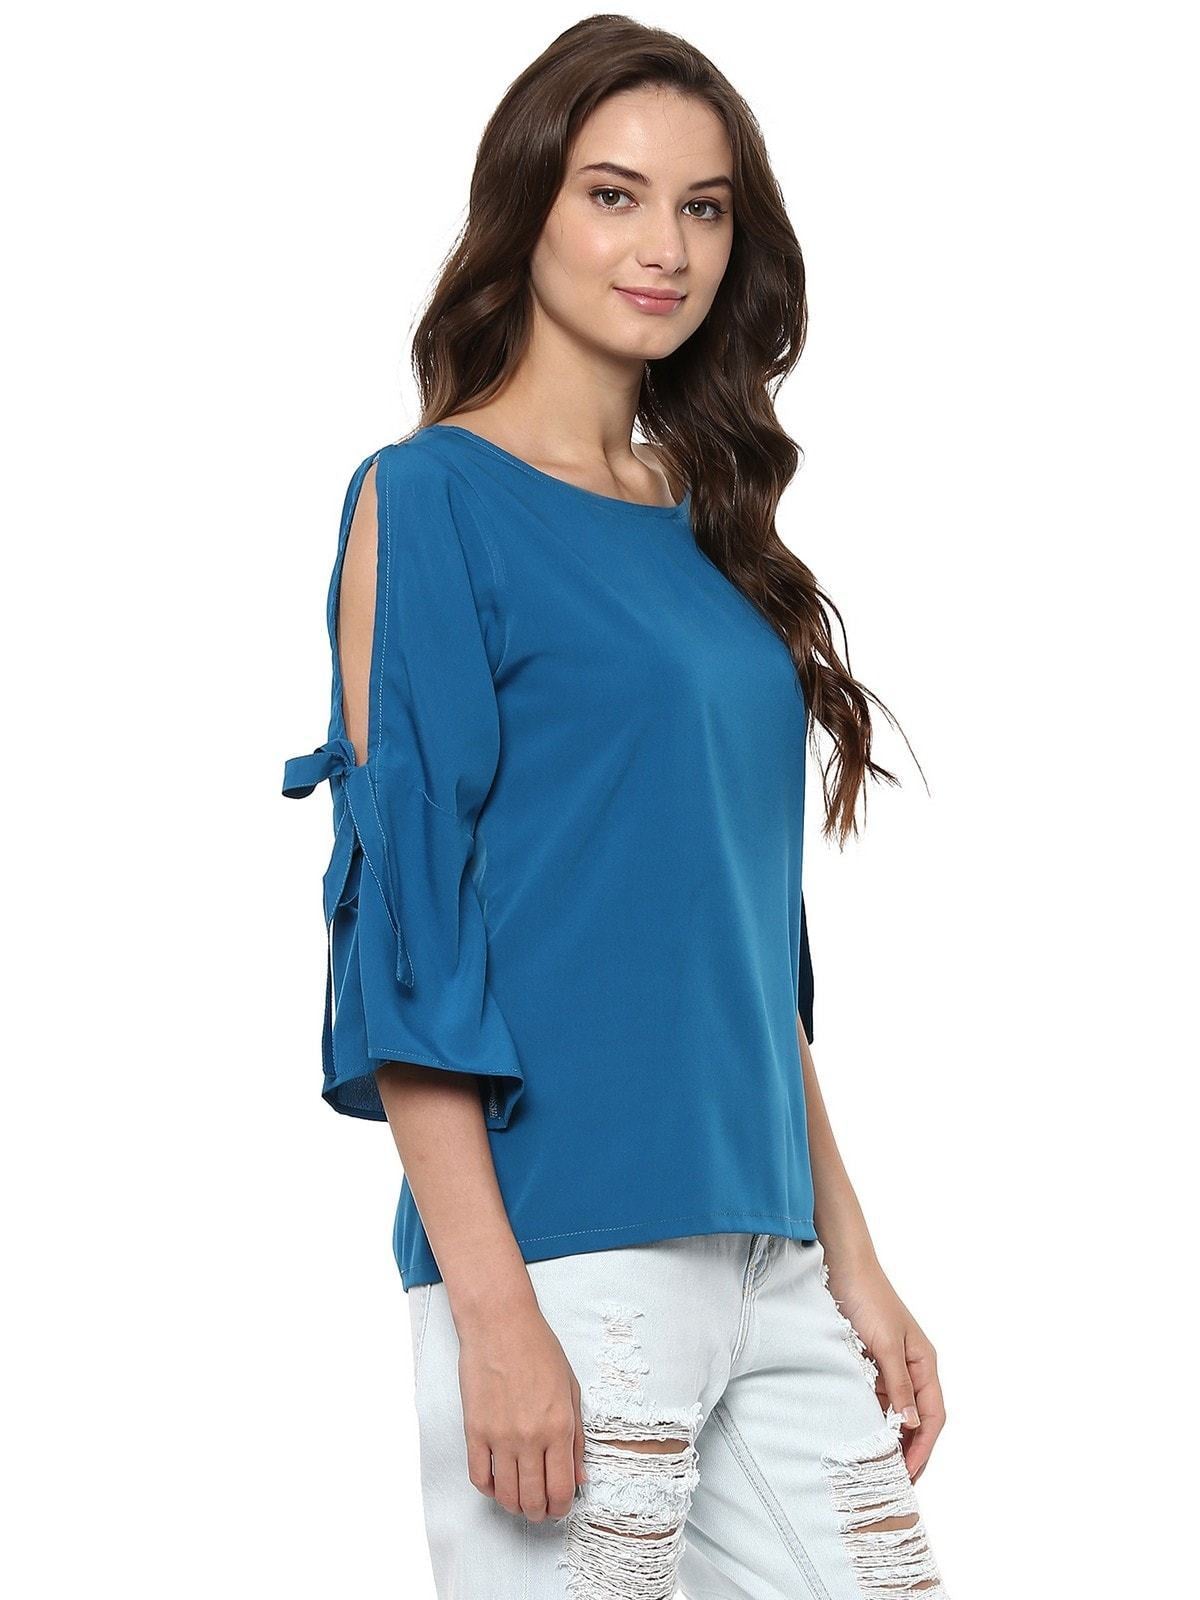 Women's Solid Top With Slit Tie-Up Bell Sleeves - Pannkh